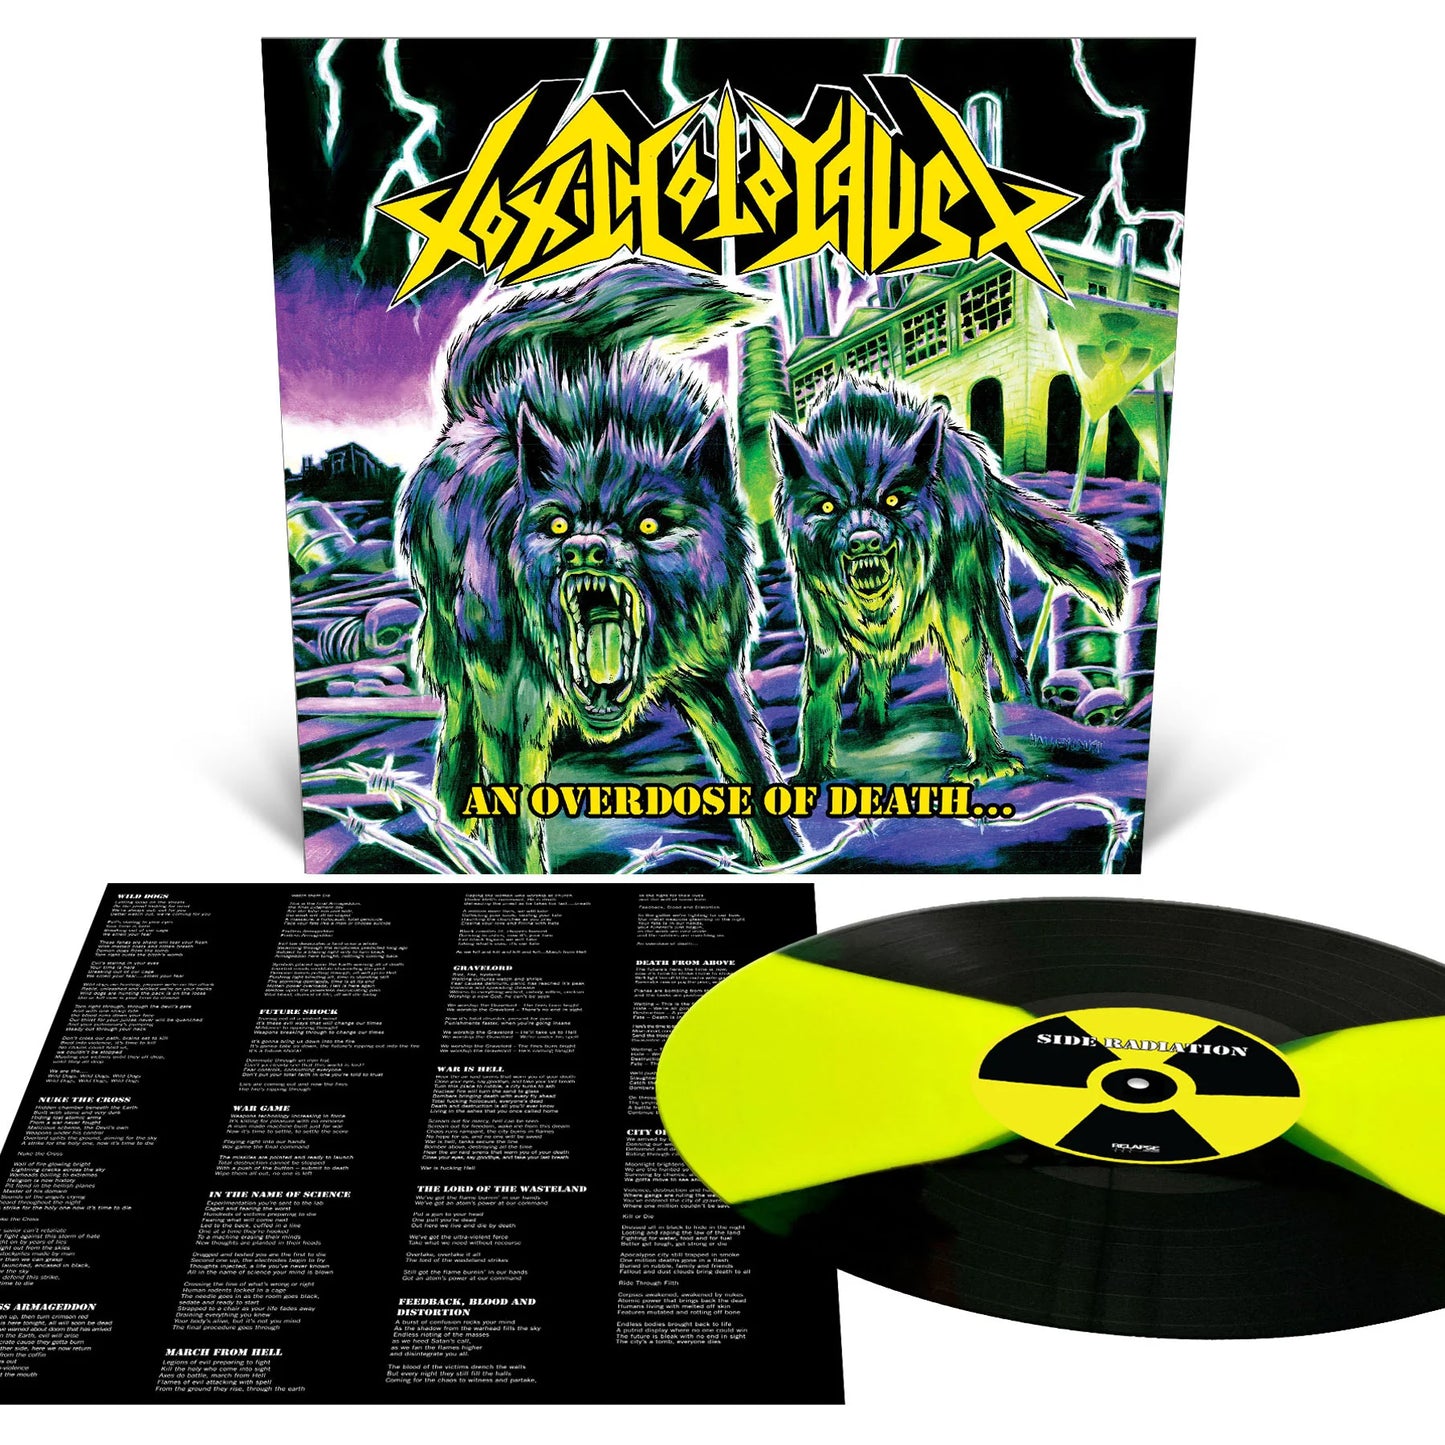 Toxic Holocaust - An Overdose of Death LP